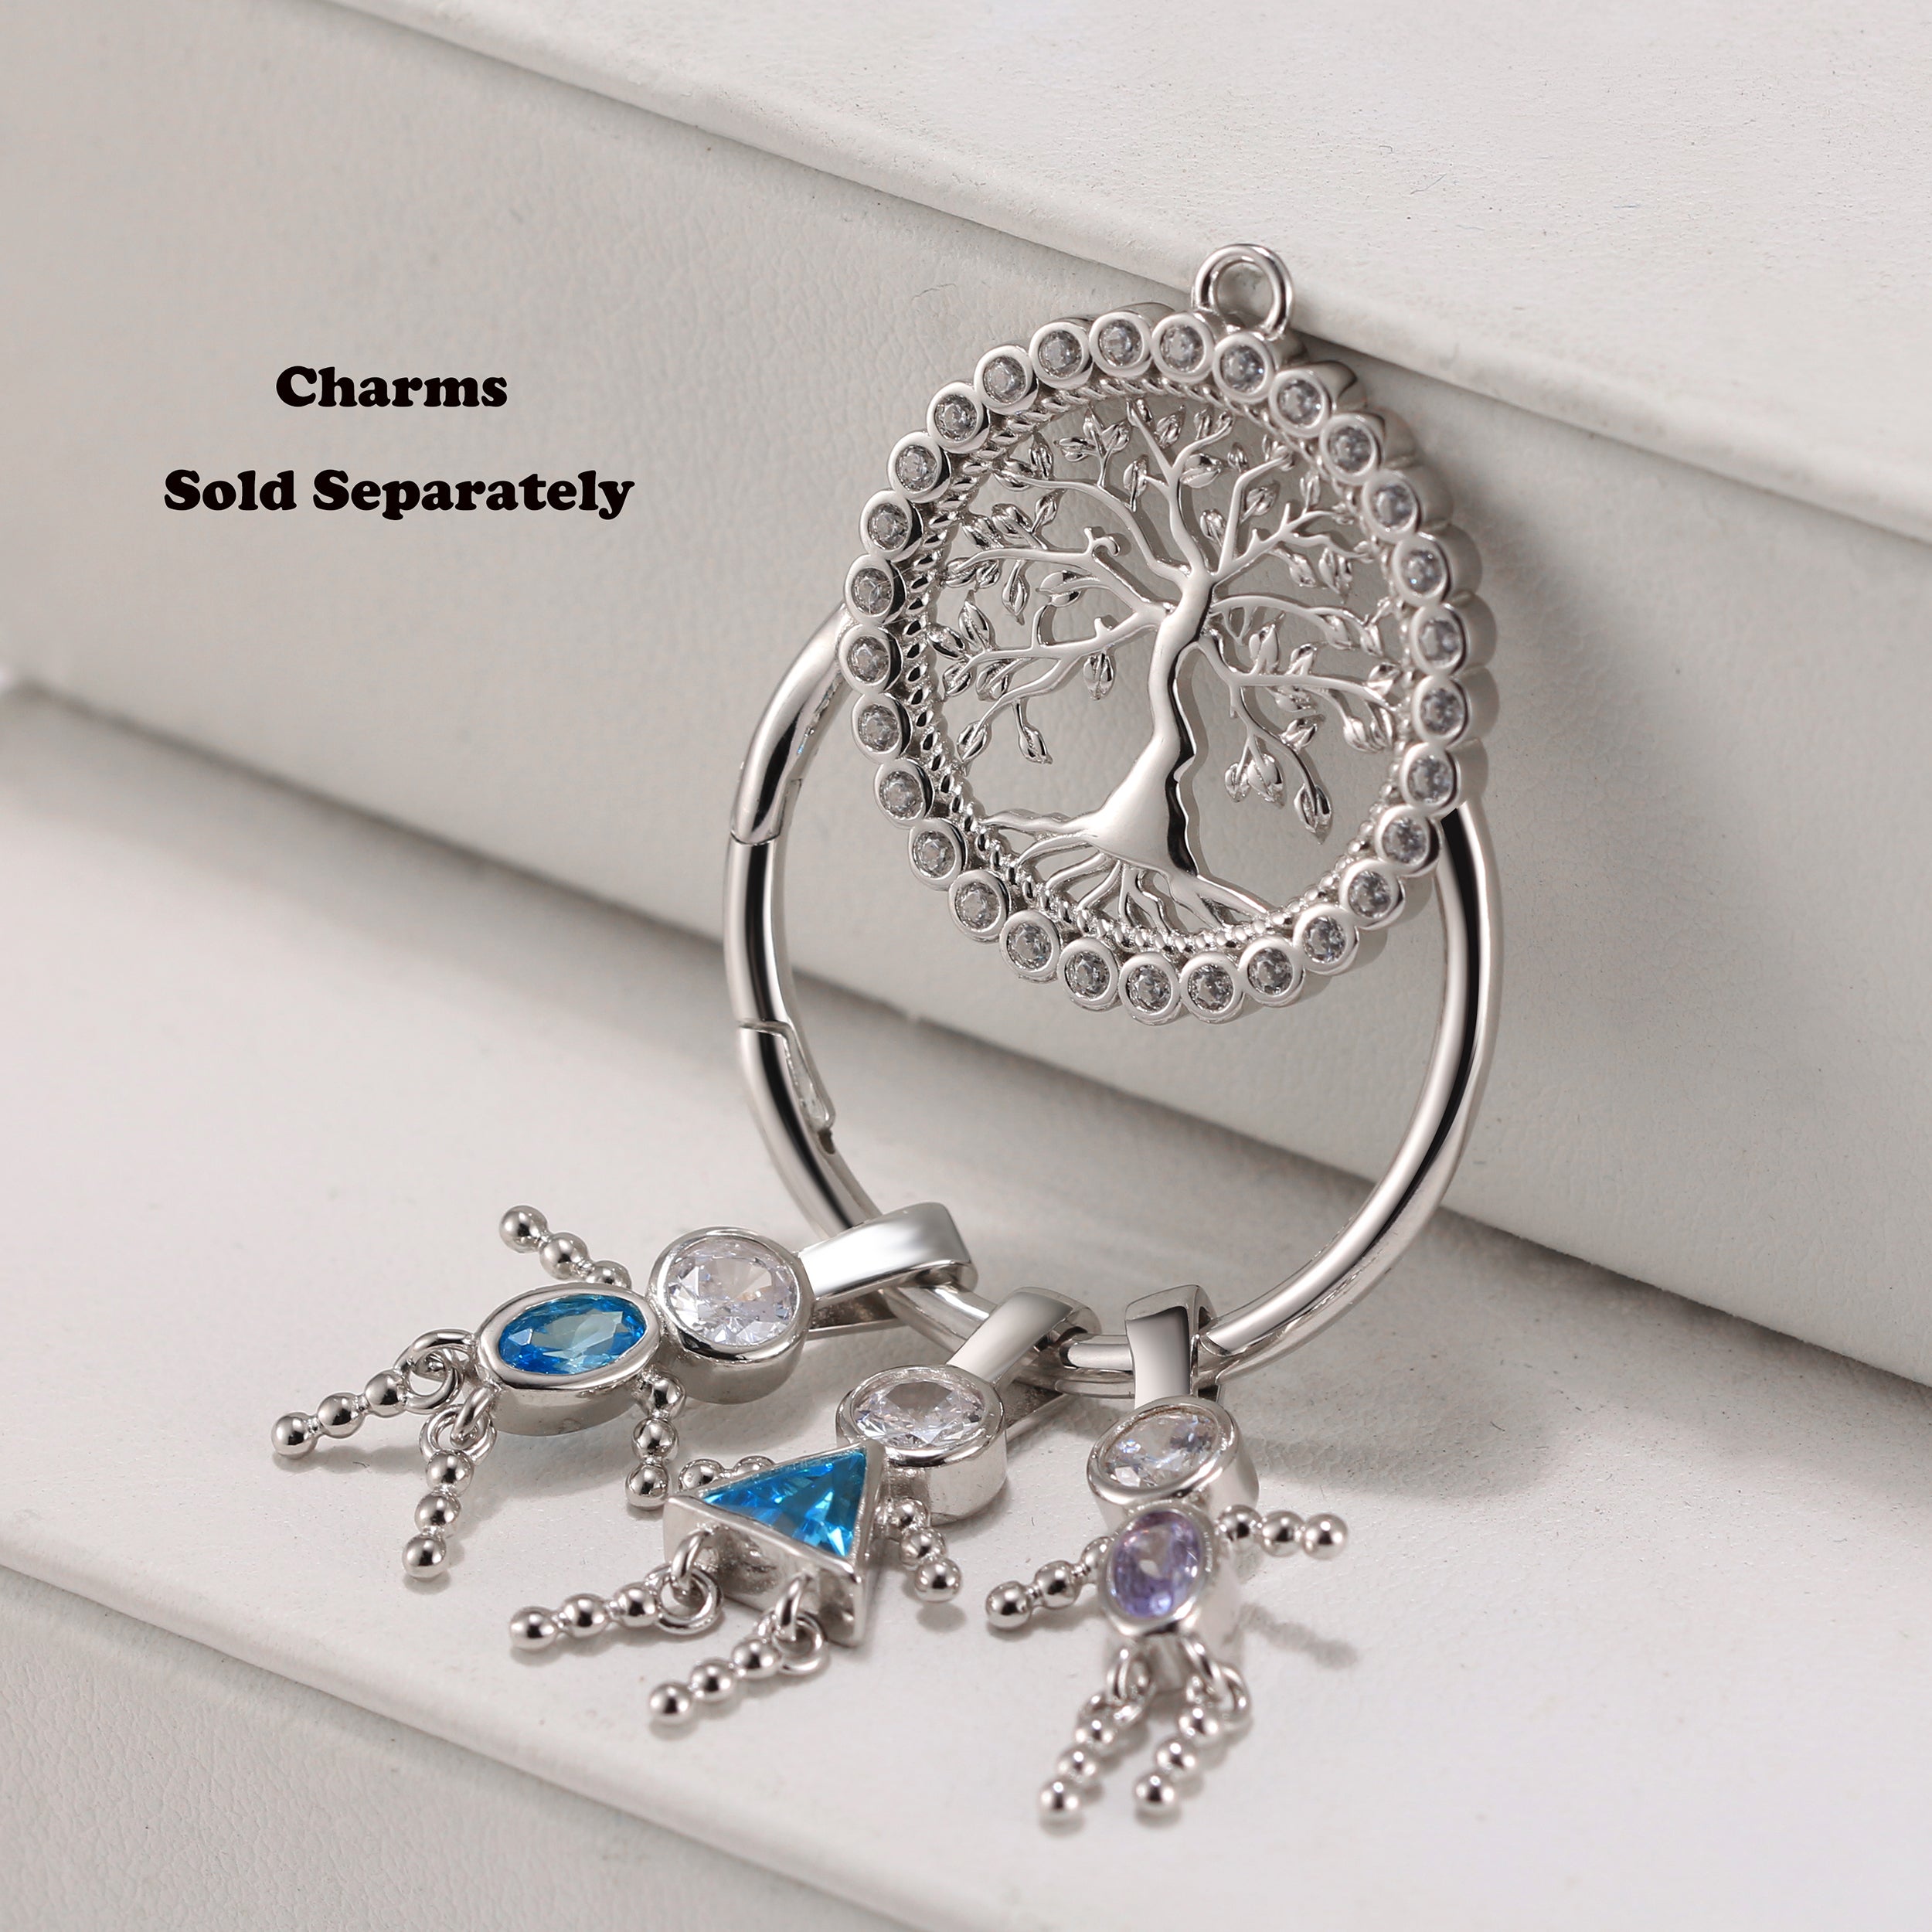 Family Tree Charm Holder for Necklace Sterling Silver Gift for Grandmother or Mother - Family Tree-CH